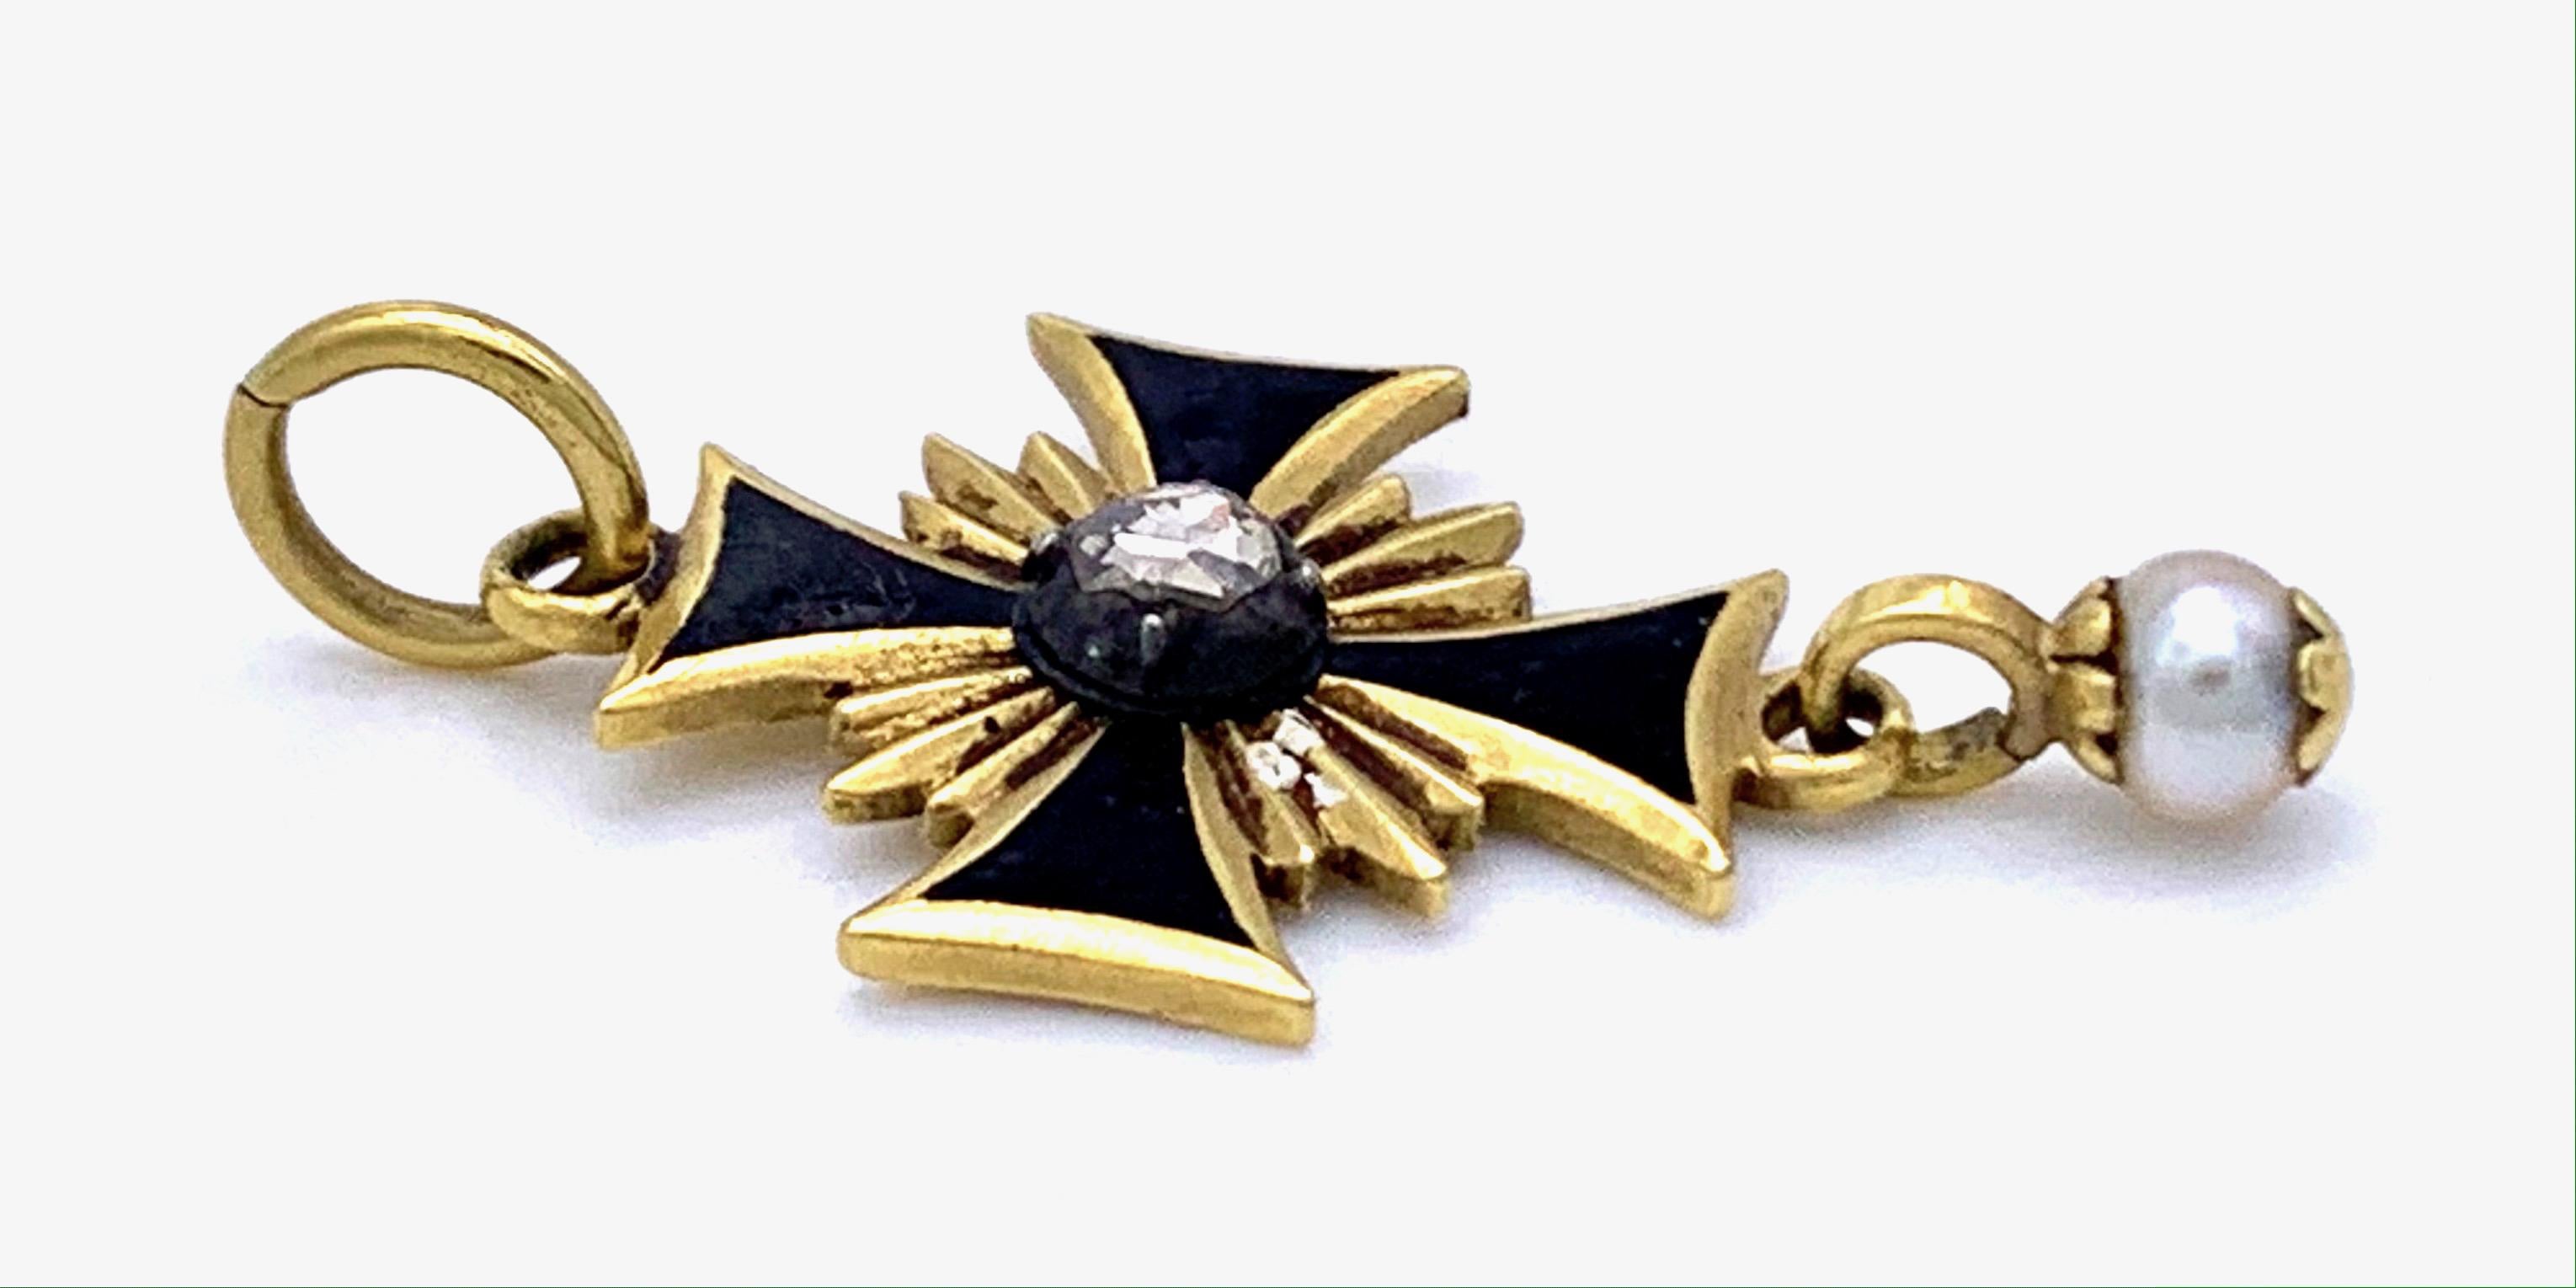 This small 14 karat gold cross is decorated with a silver mounted diamond and has a a natural oriental pearl suspended from it. It is highlighted with black enamel.